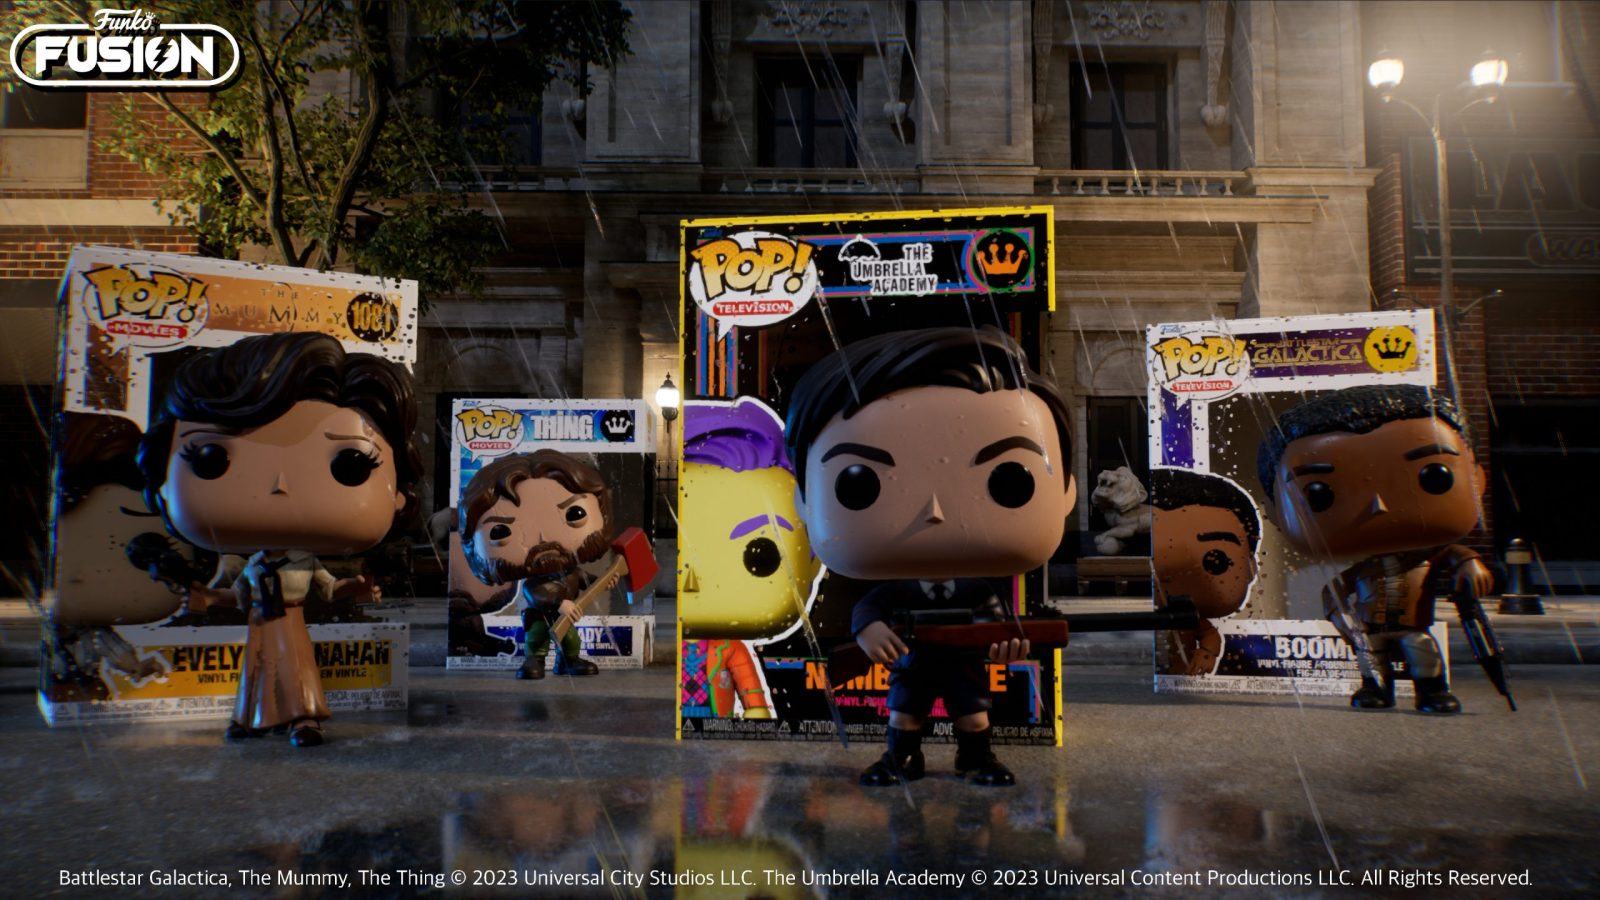 Funko Fusion the Pop! culture universe to life with beloved characters from Back to the Future, more - GAMING TREND